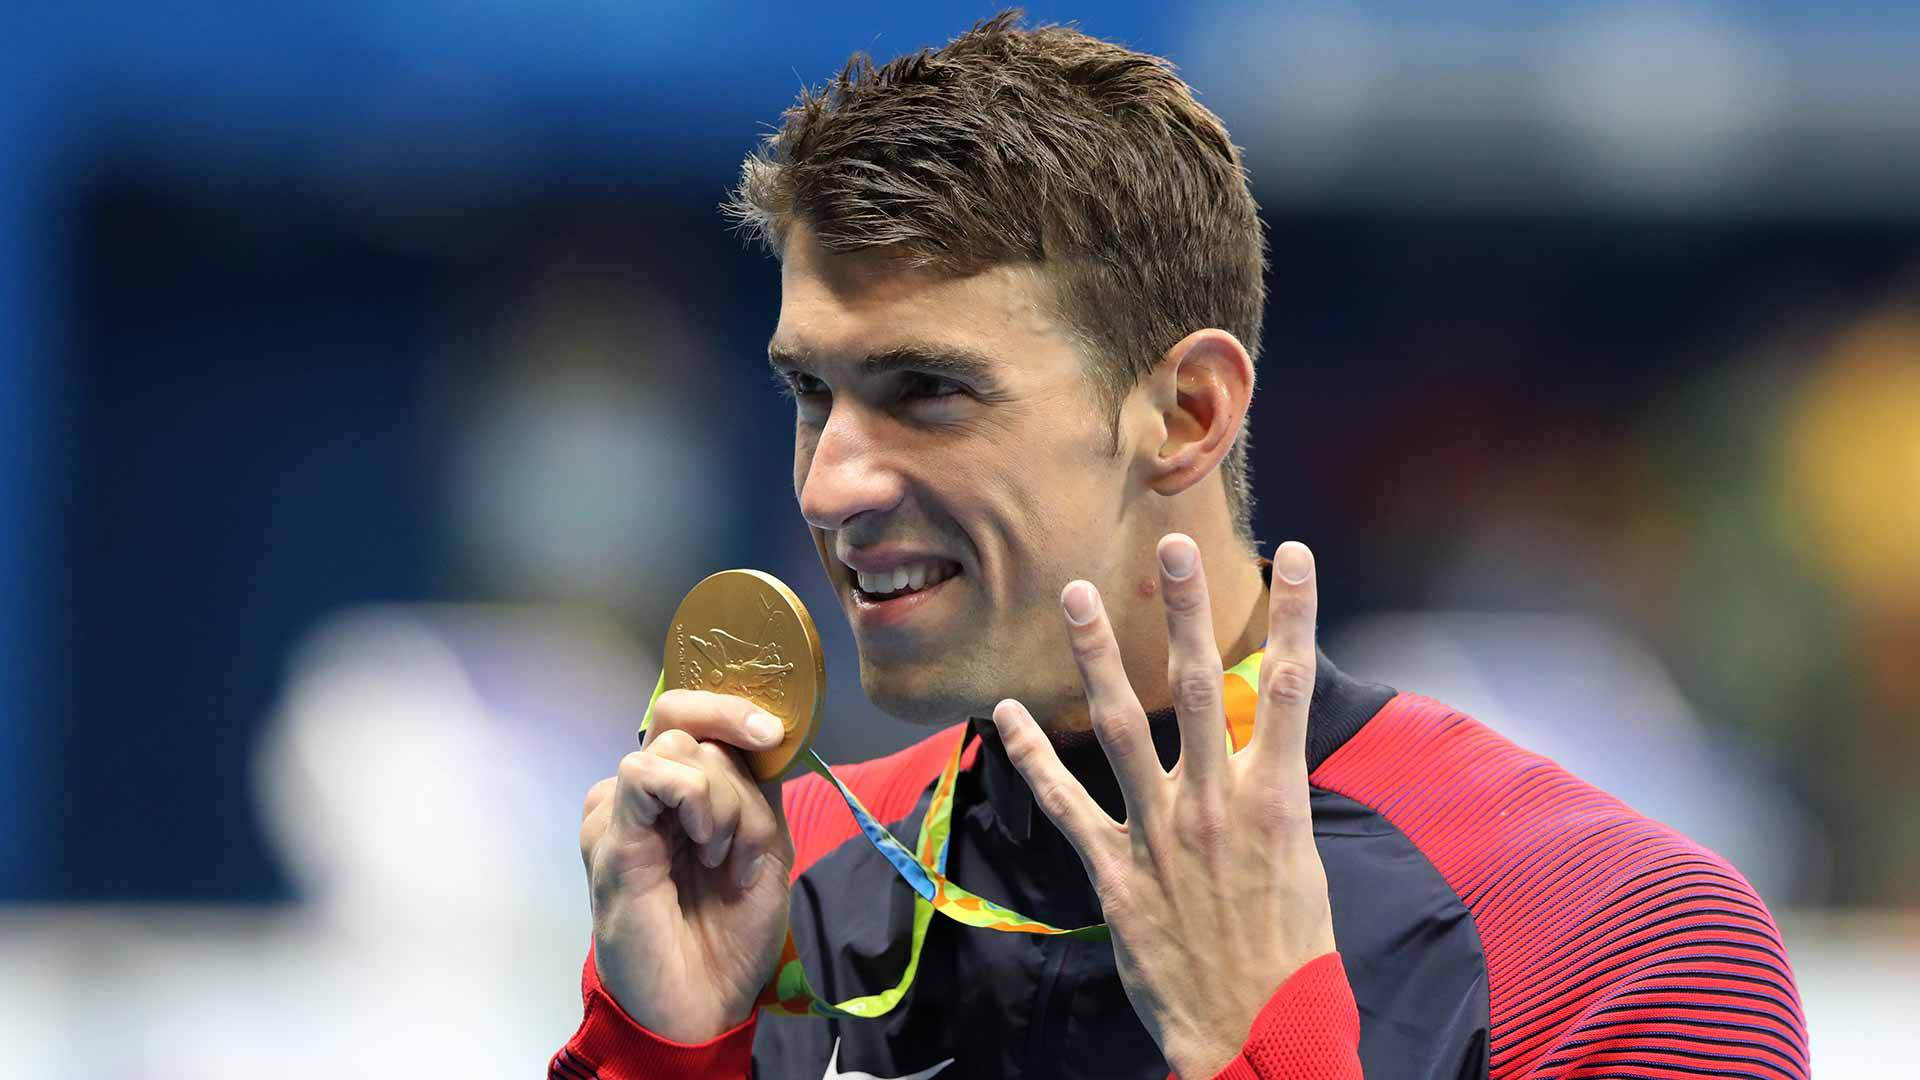 Michael Phelps Displaying Four Victory Signs After Winning